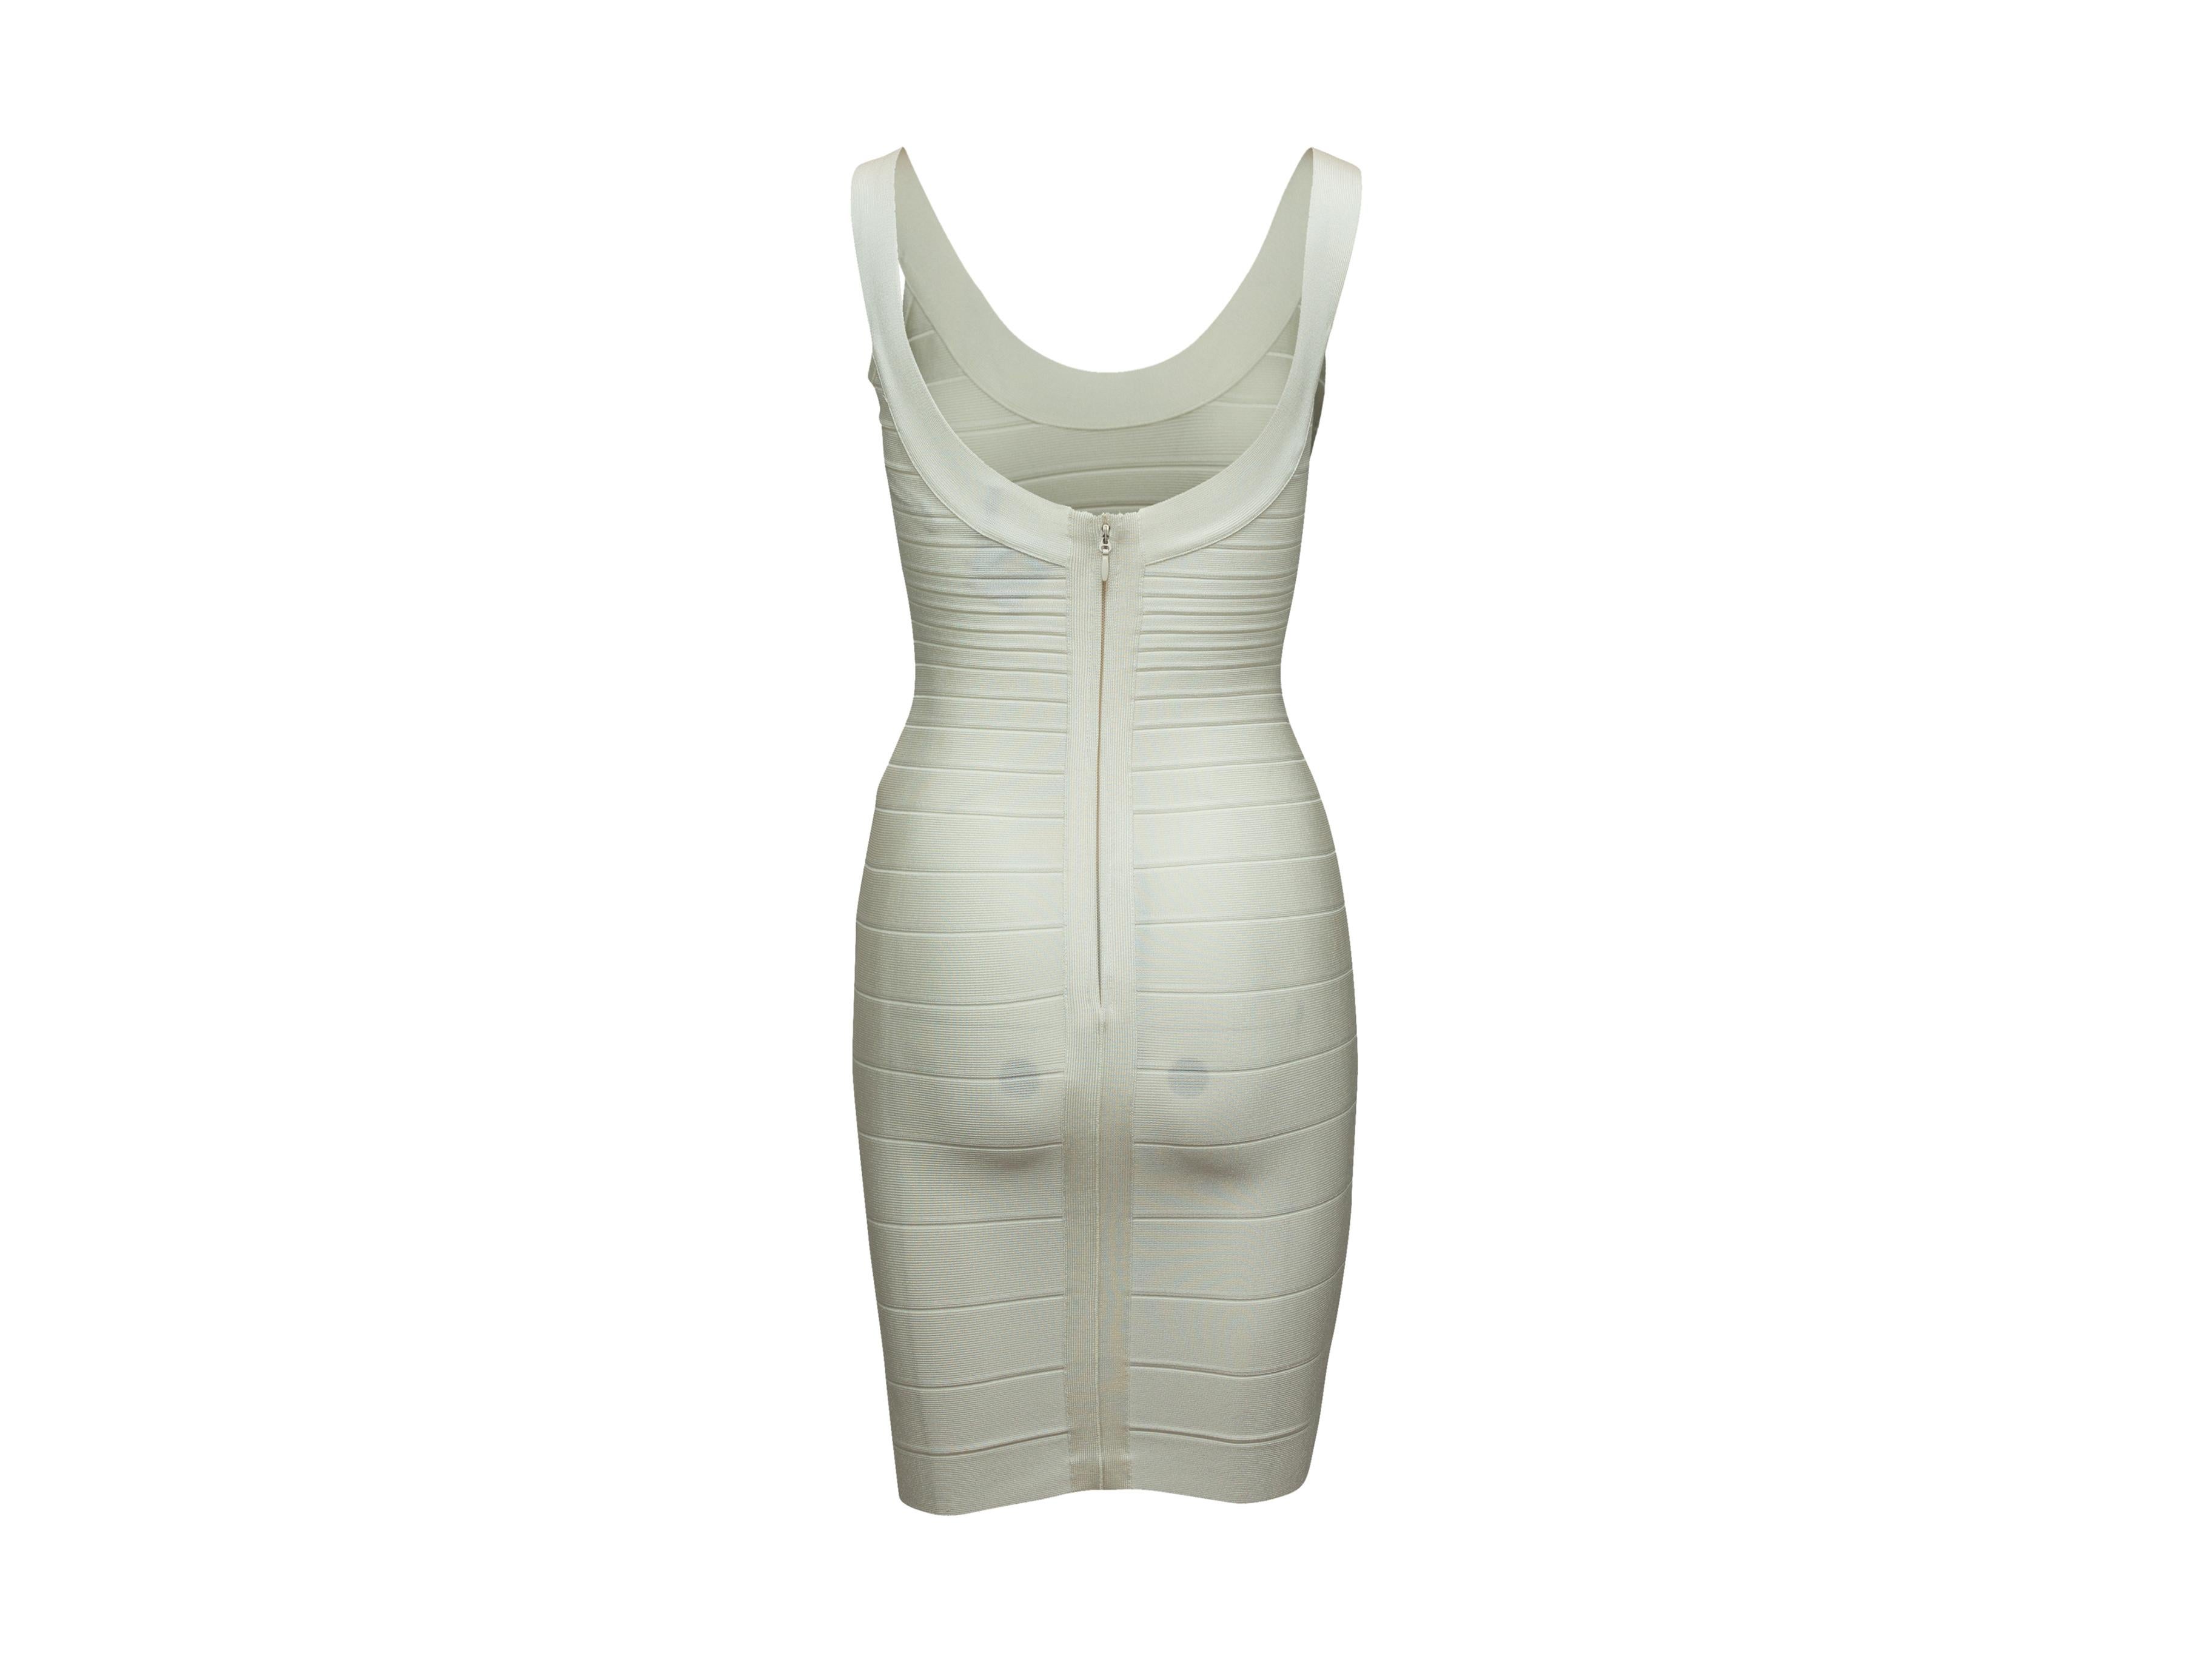 Product details: White sleeveless bandage dress by Herve Leger. Scoop neck. Zip closure at back. 23